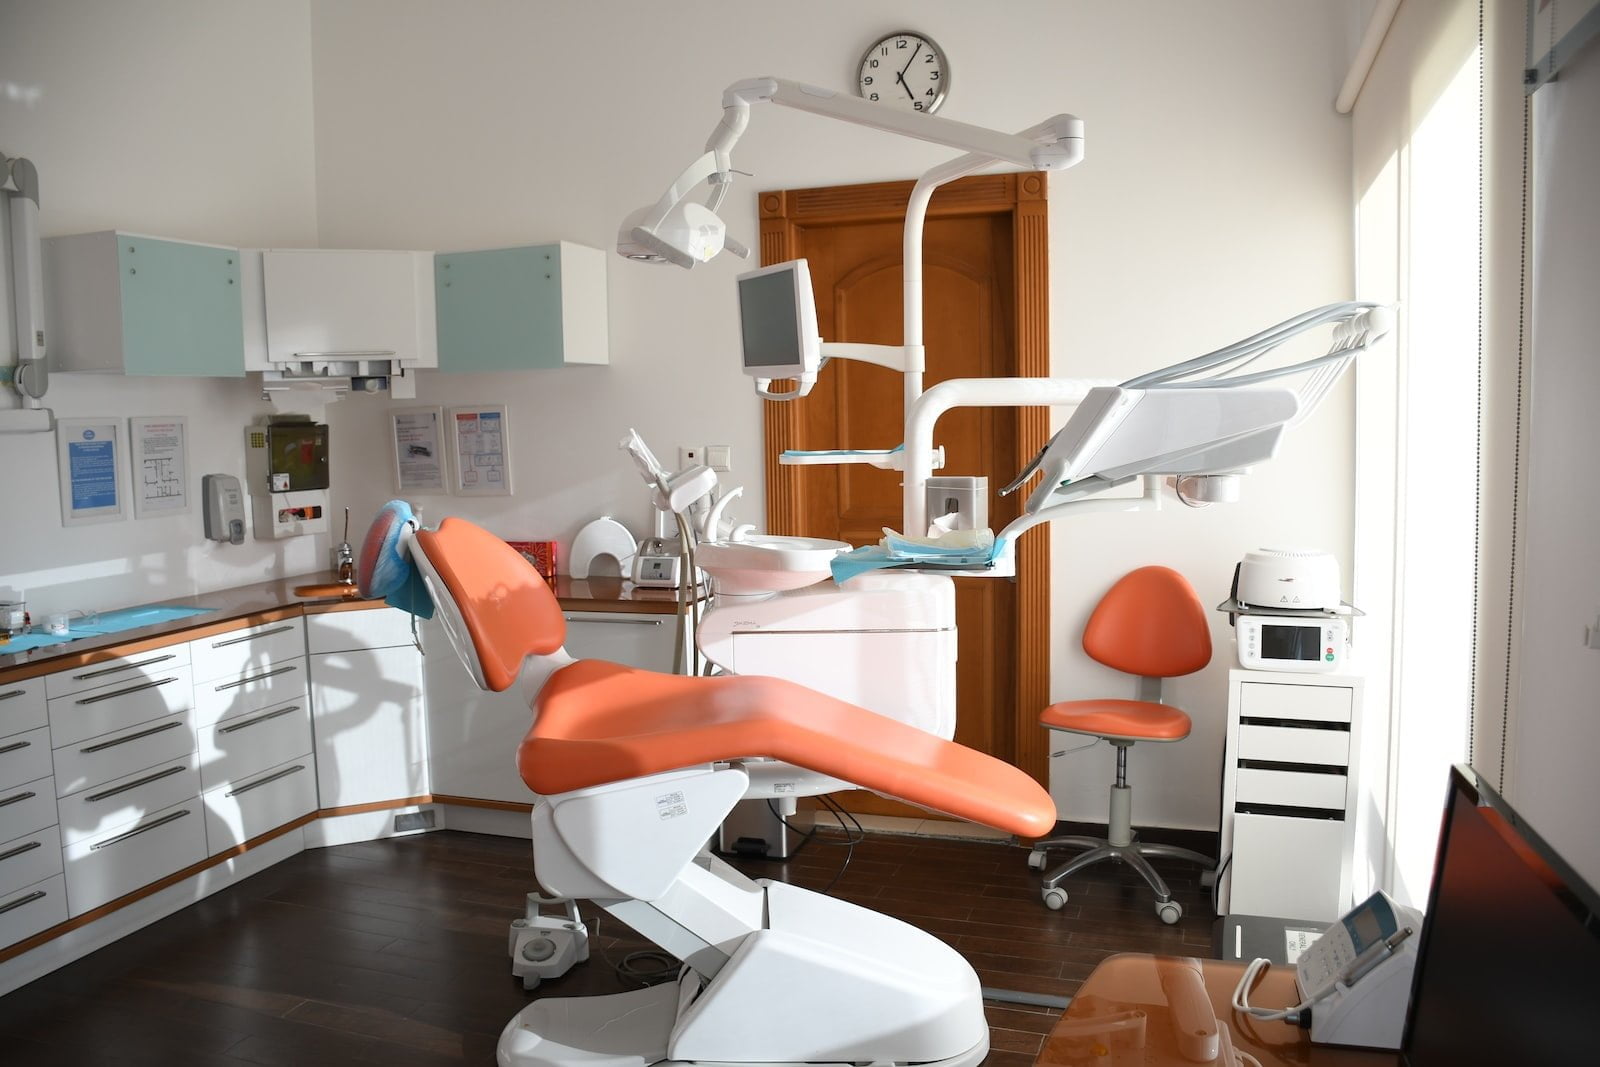 Local SEO Strategies to Boost Your Dental Practice